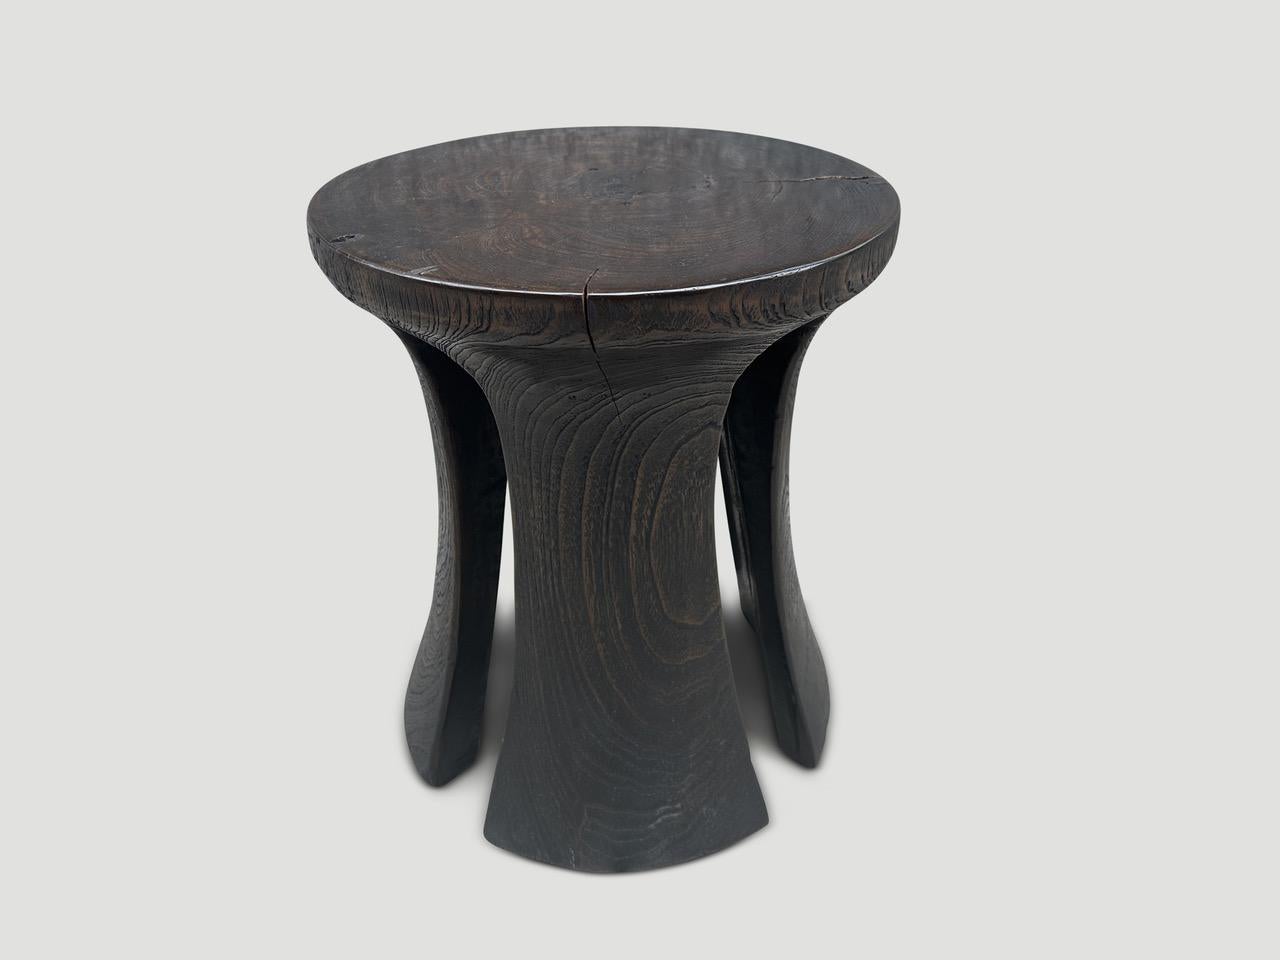 A century old teak wood mortar originally used to grind rice, is repurposed into this minimalist side table or stool. We first turned it upside down and smoothed out the entire piece then added sleek cut outs on the sides with a small butterfly